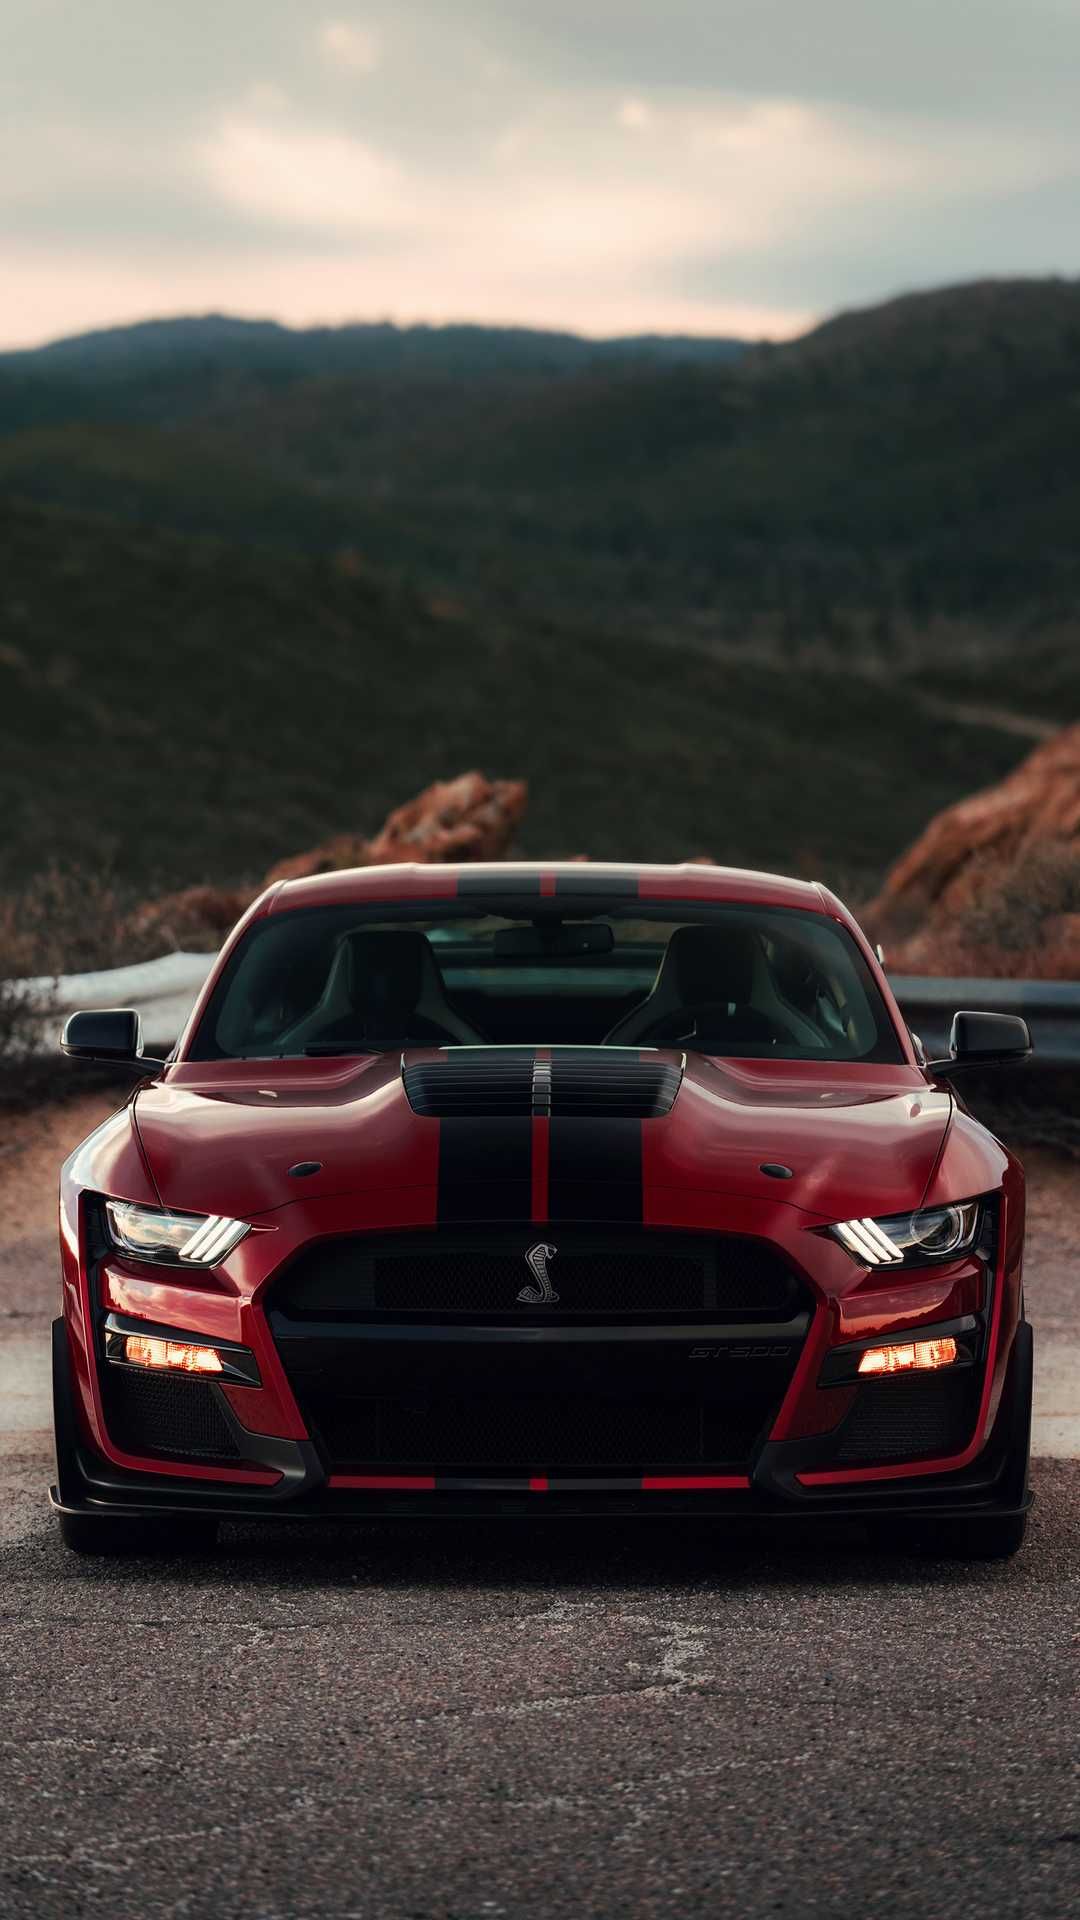 2020). Ford mustang shelby gt500 .de